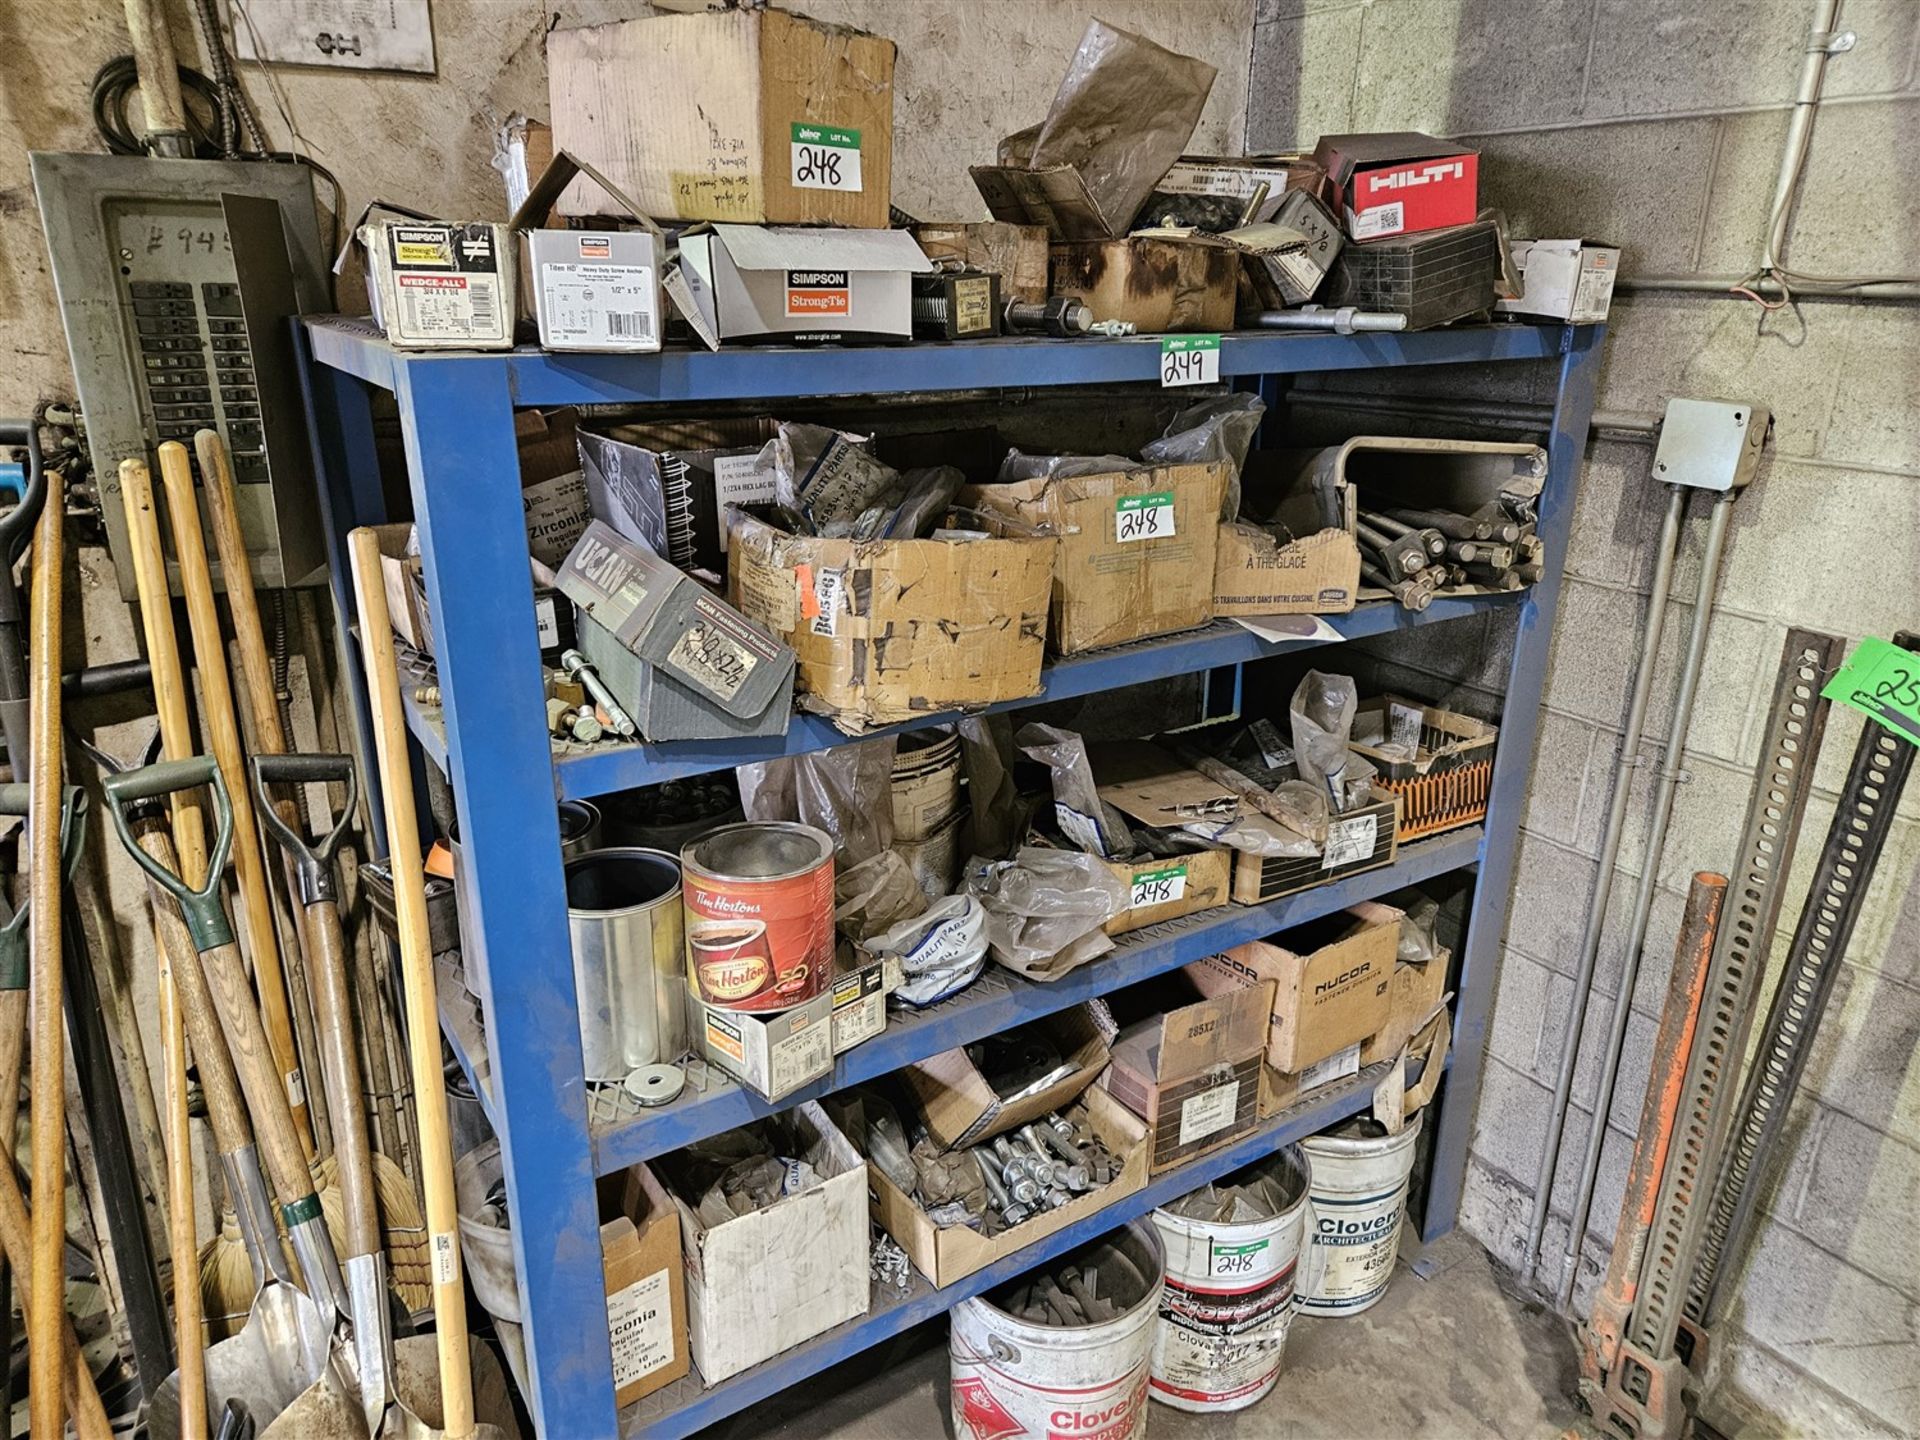 CONTENTS OF SHELF - NUTS, BOLTS, WASHERS, SCREWS ETC.